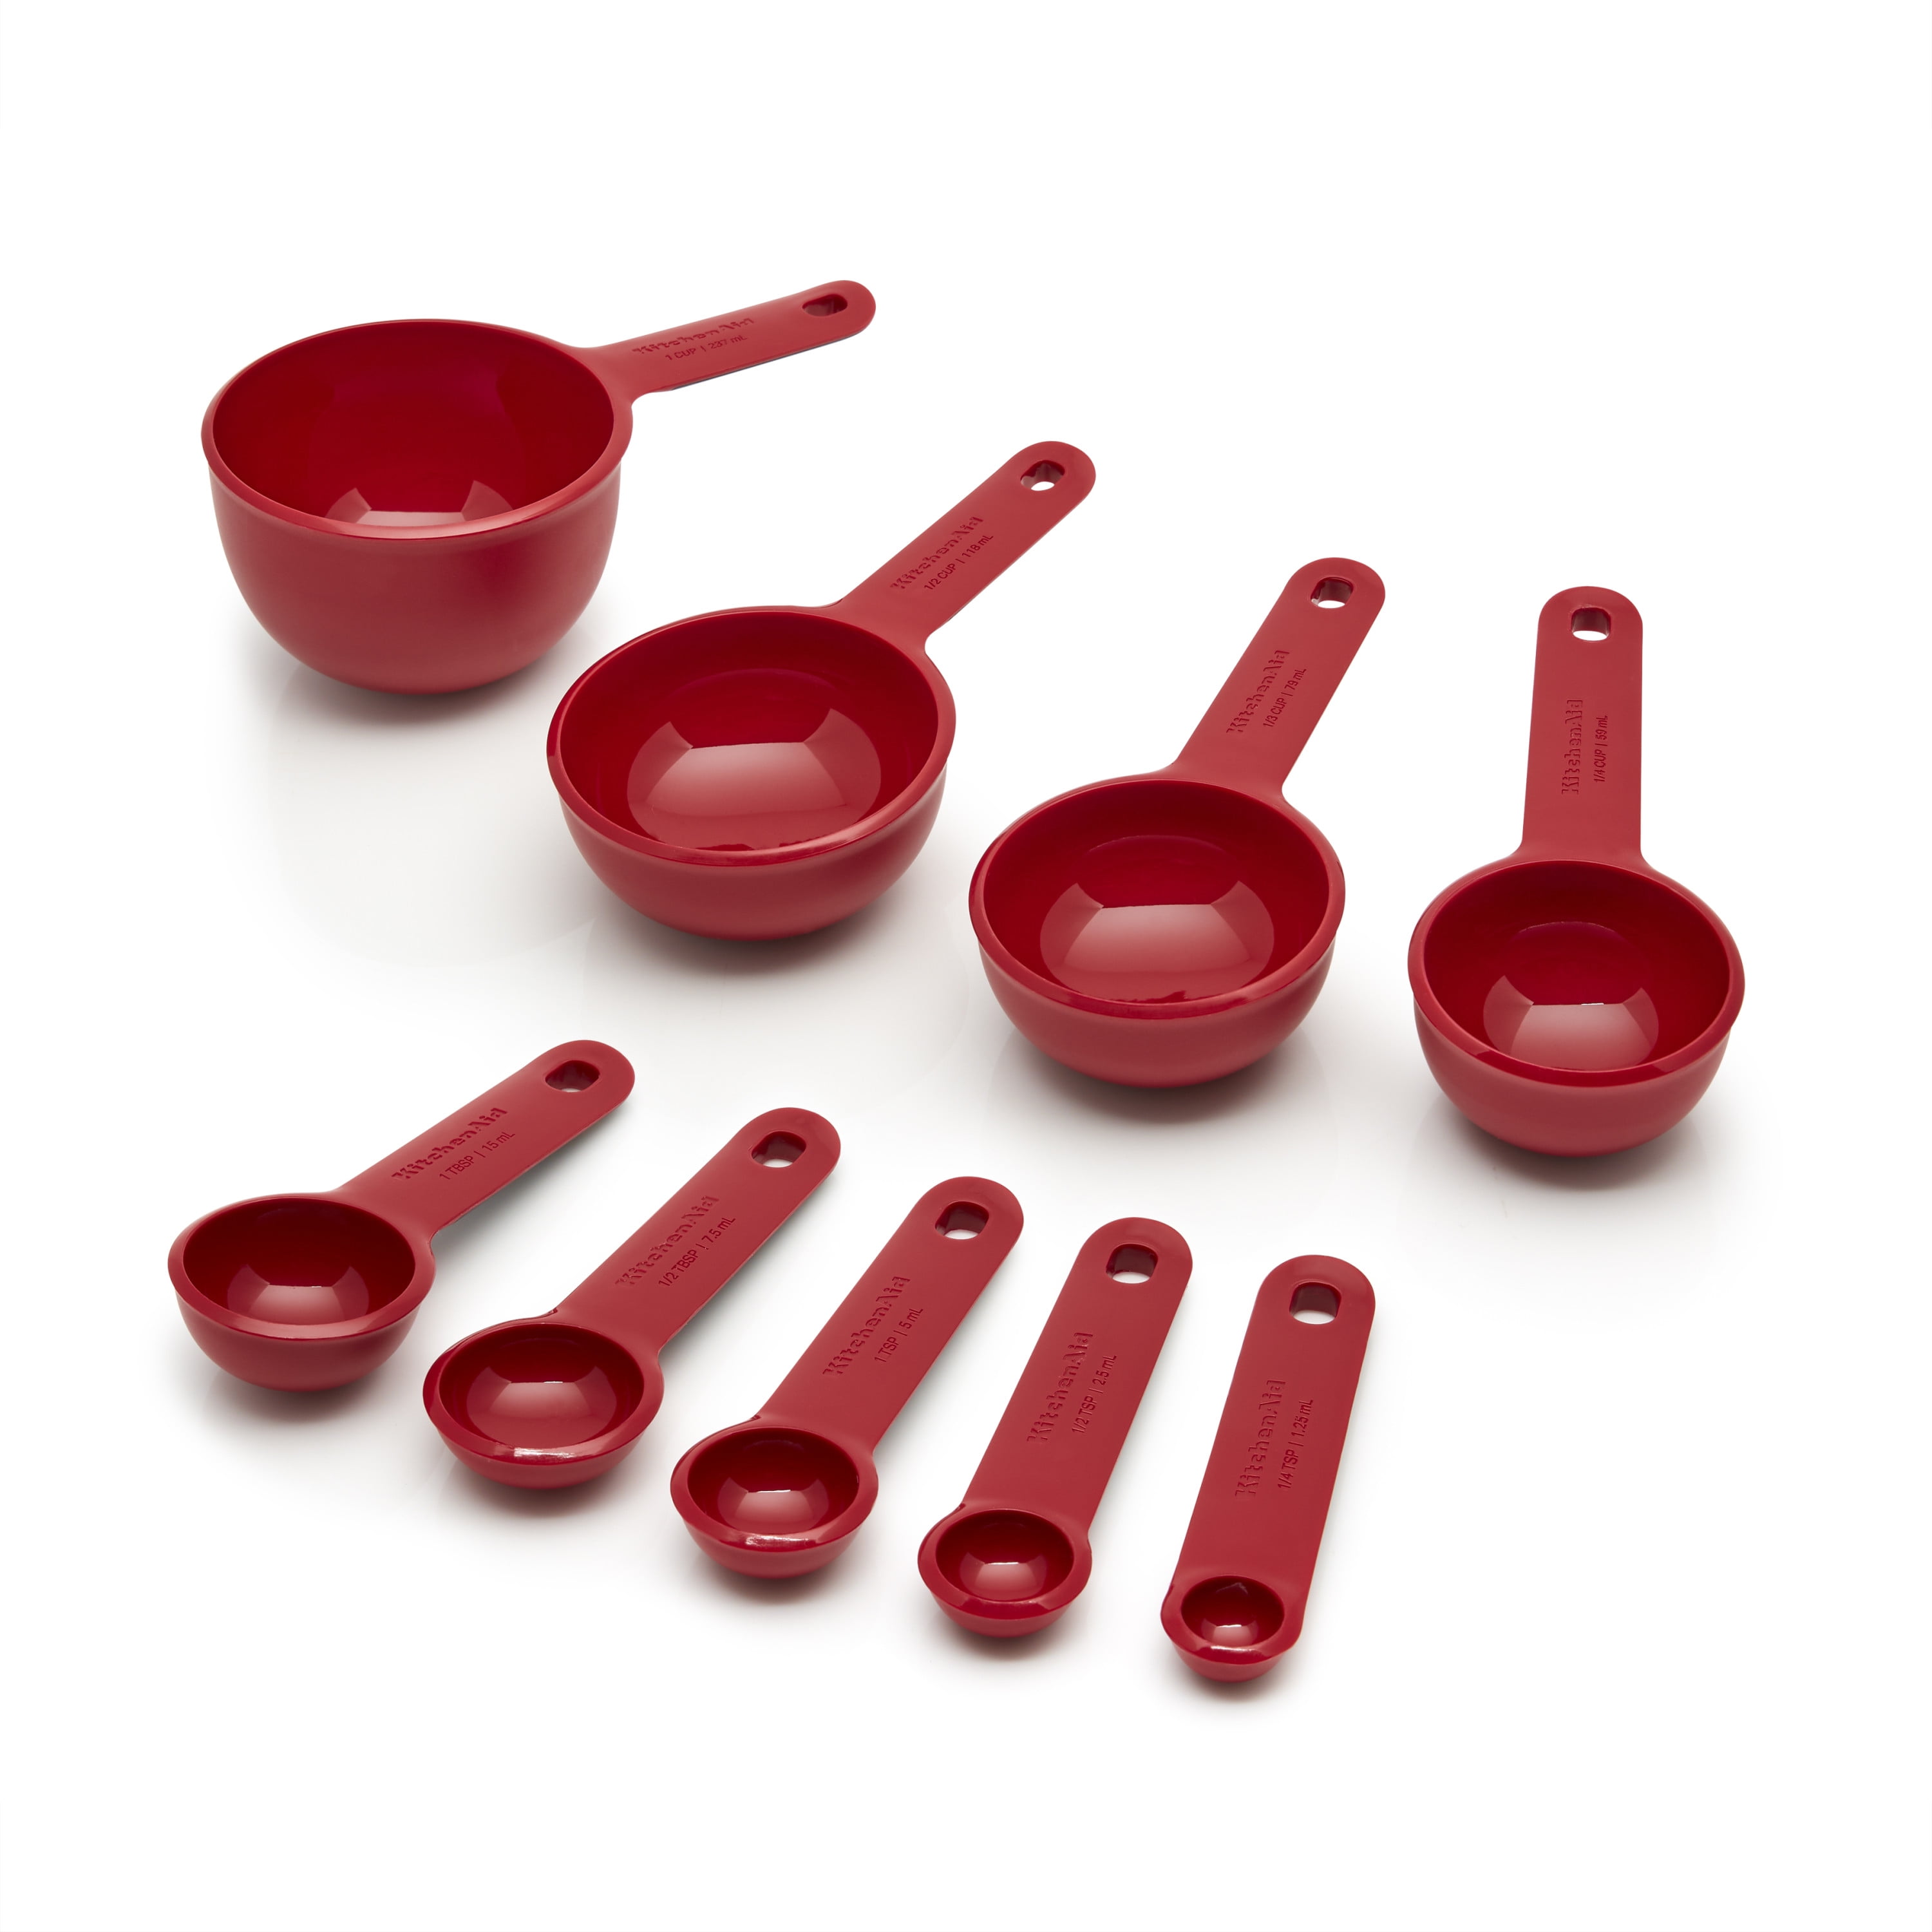 KitchenAid Classic Measuring Cups And Spoons Set, Set of 9, Red/Black